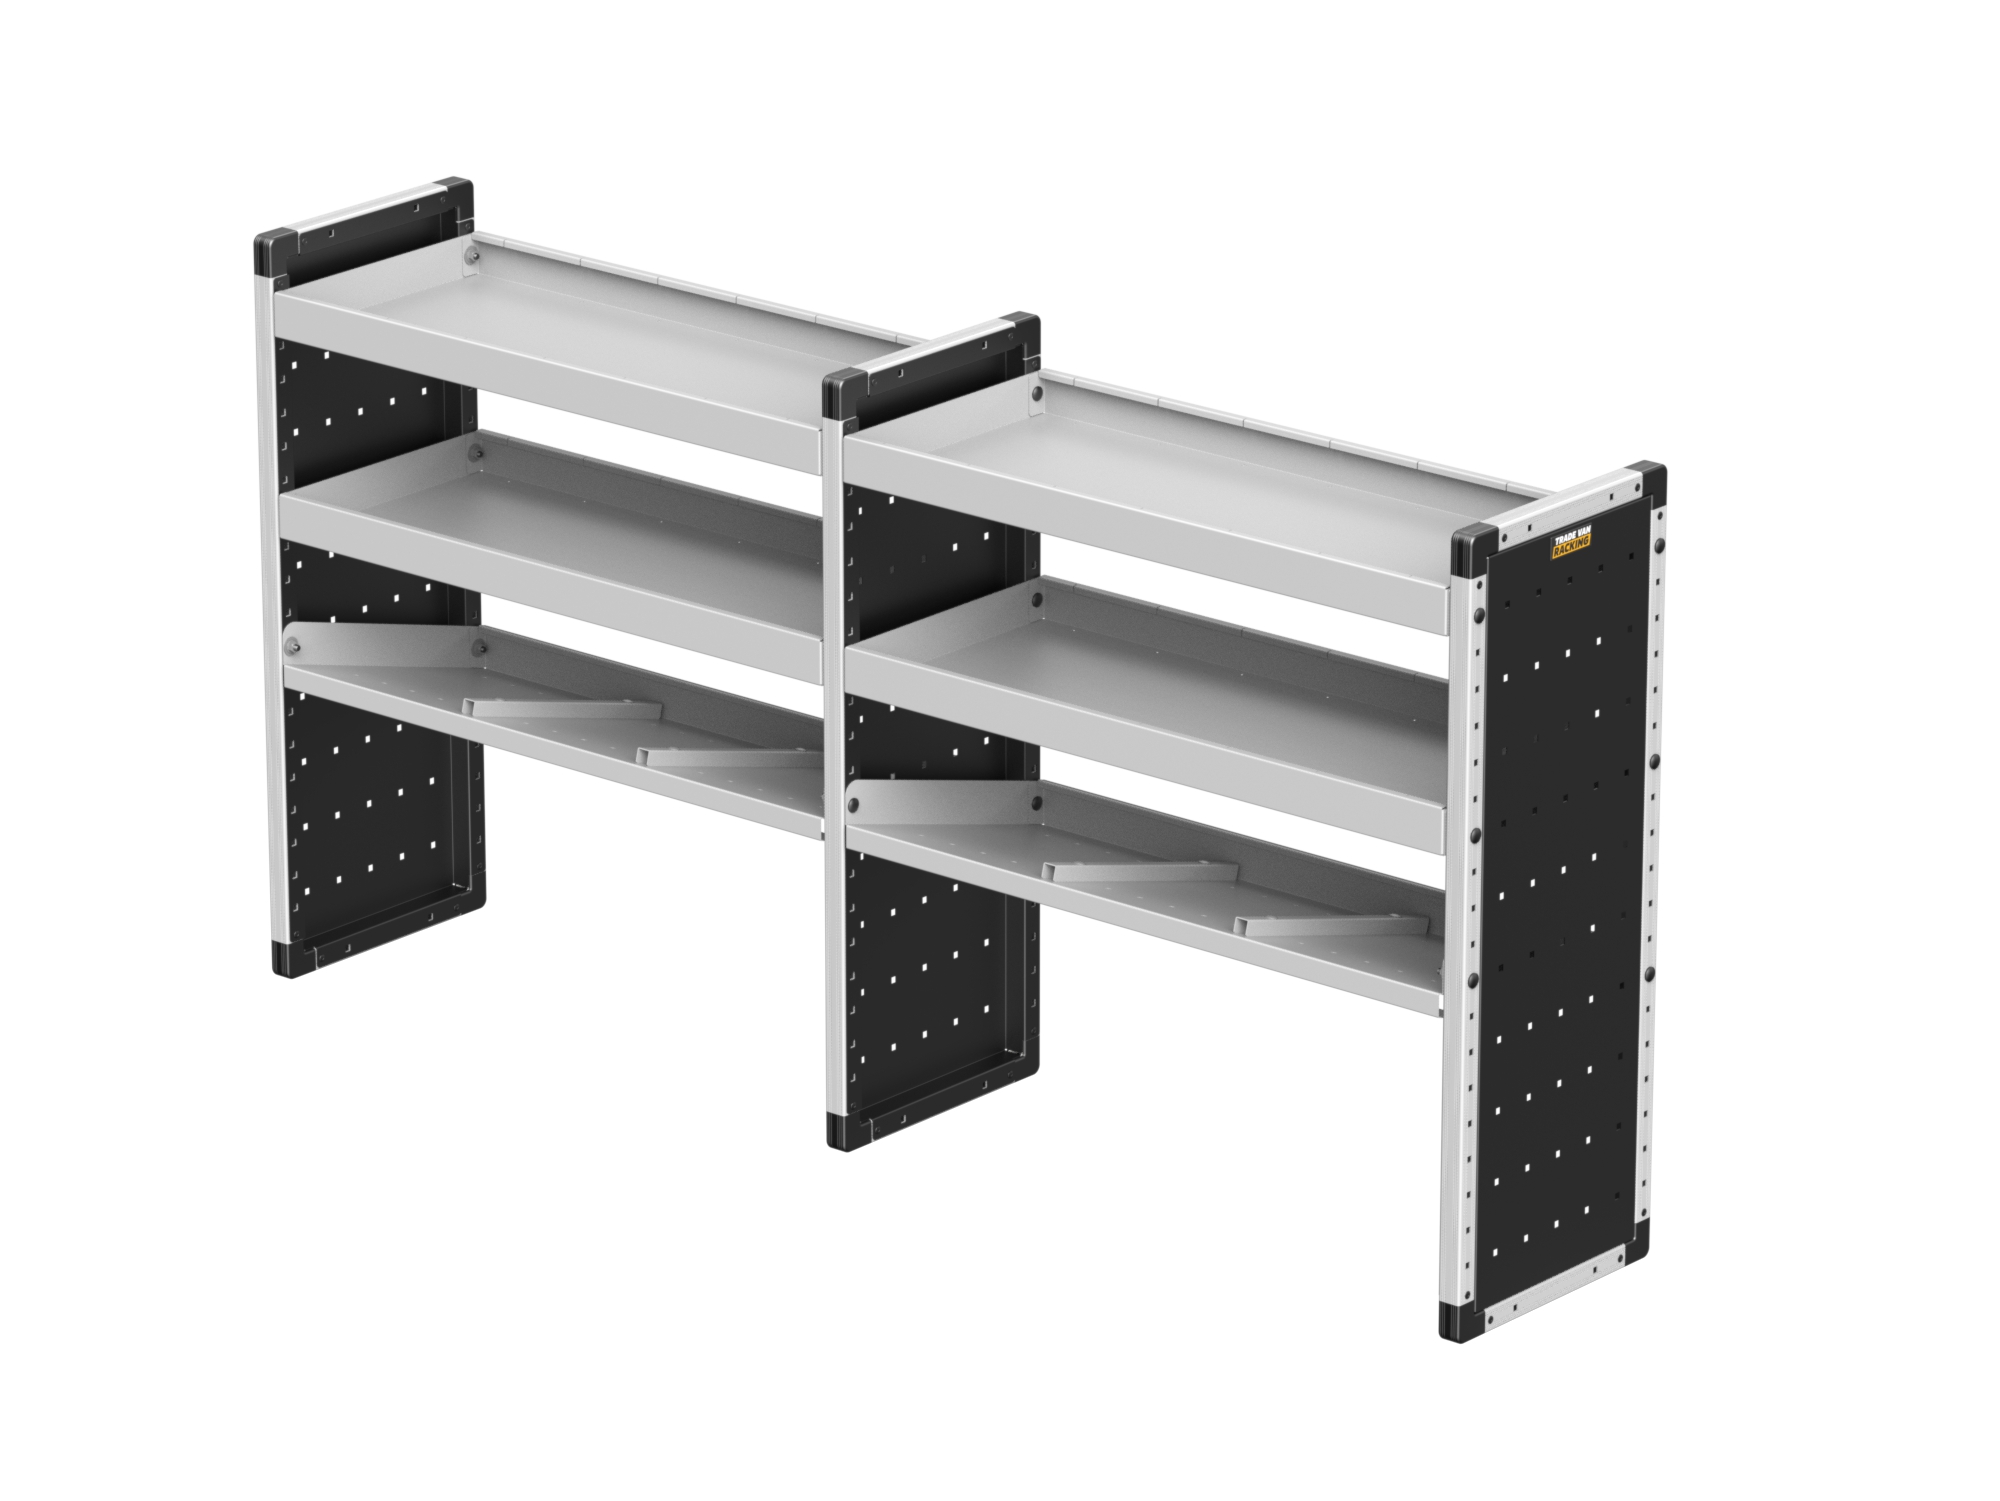 Trade Van Racking - Double Unit - 2 straight & 1 angled per bay - TVR-DBL-004